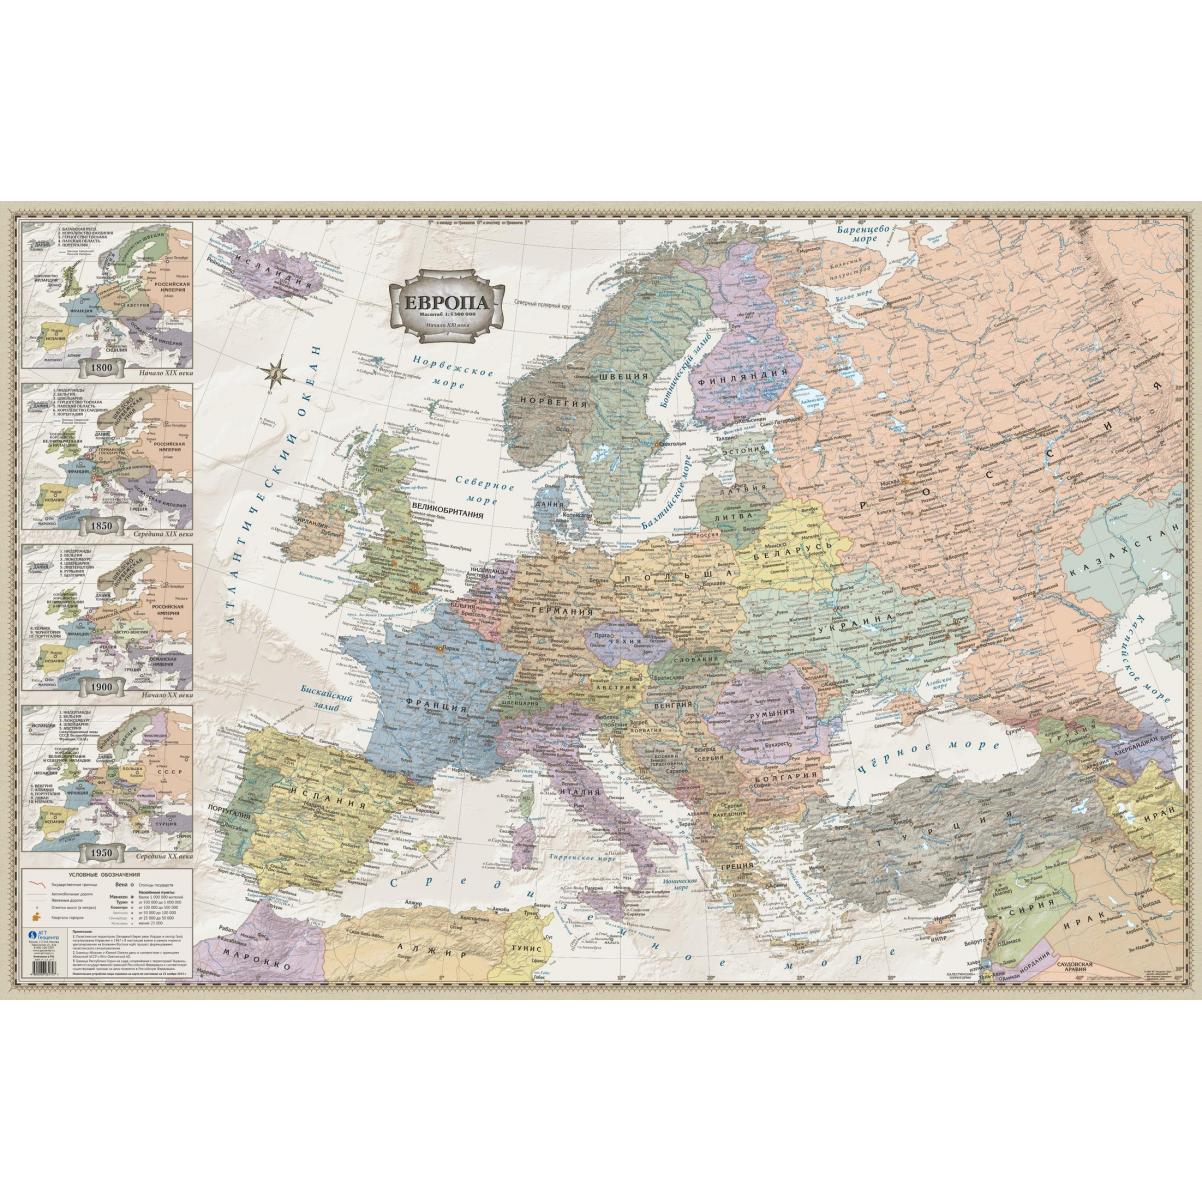 Europe-retro-52-wall-Rus-large - The Map Shop